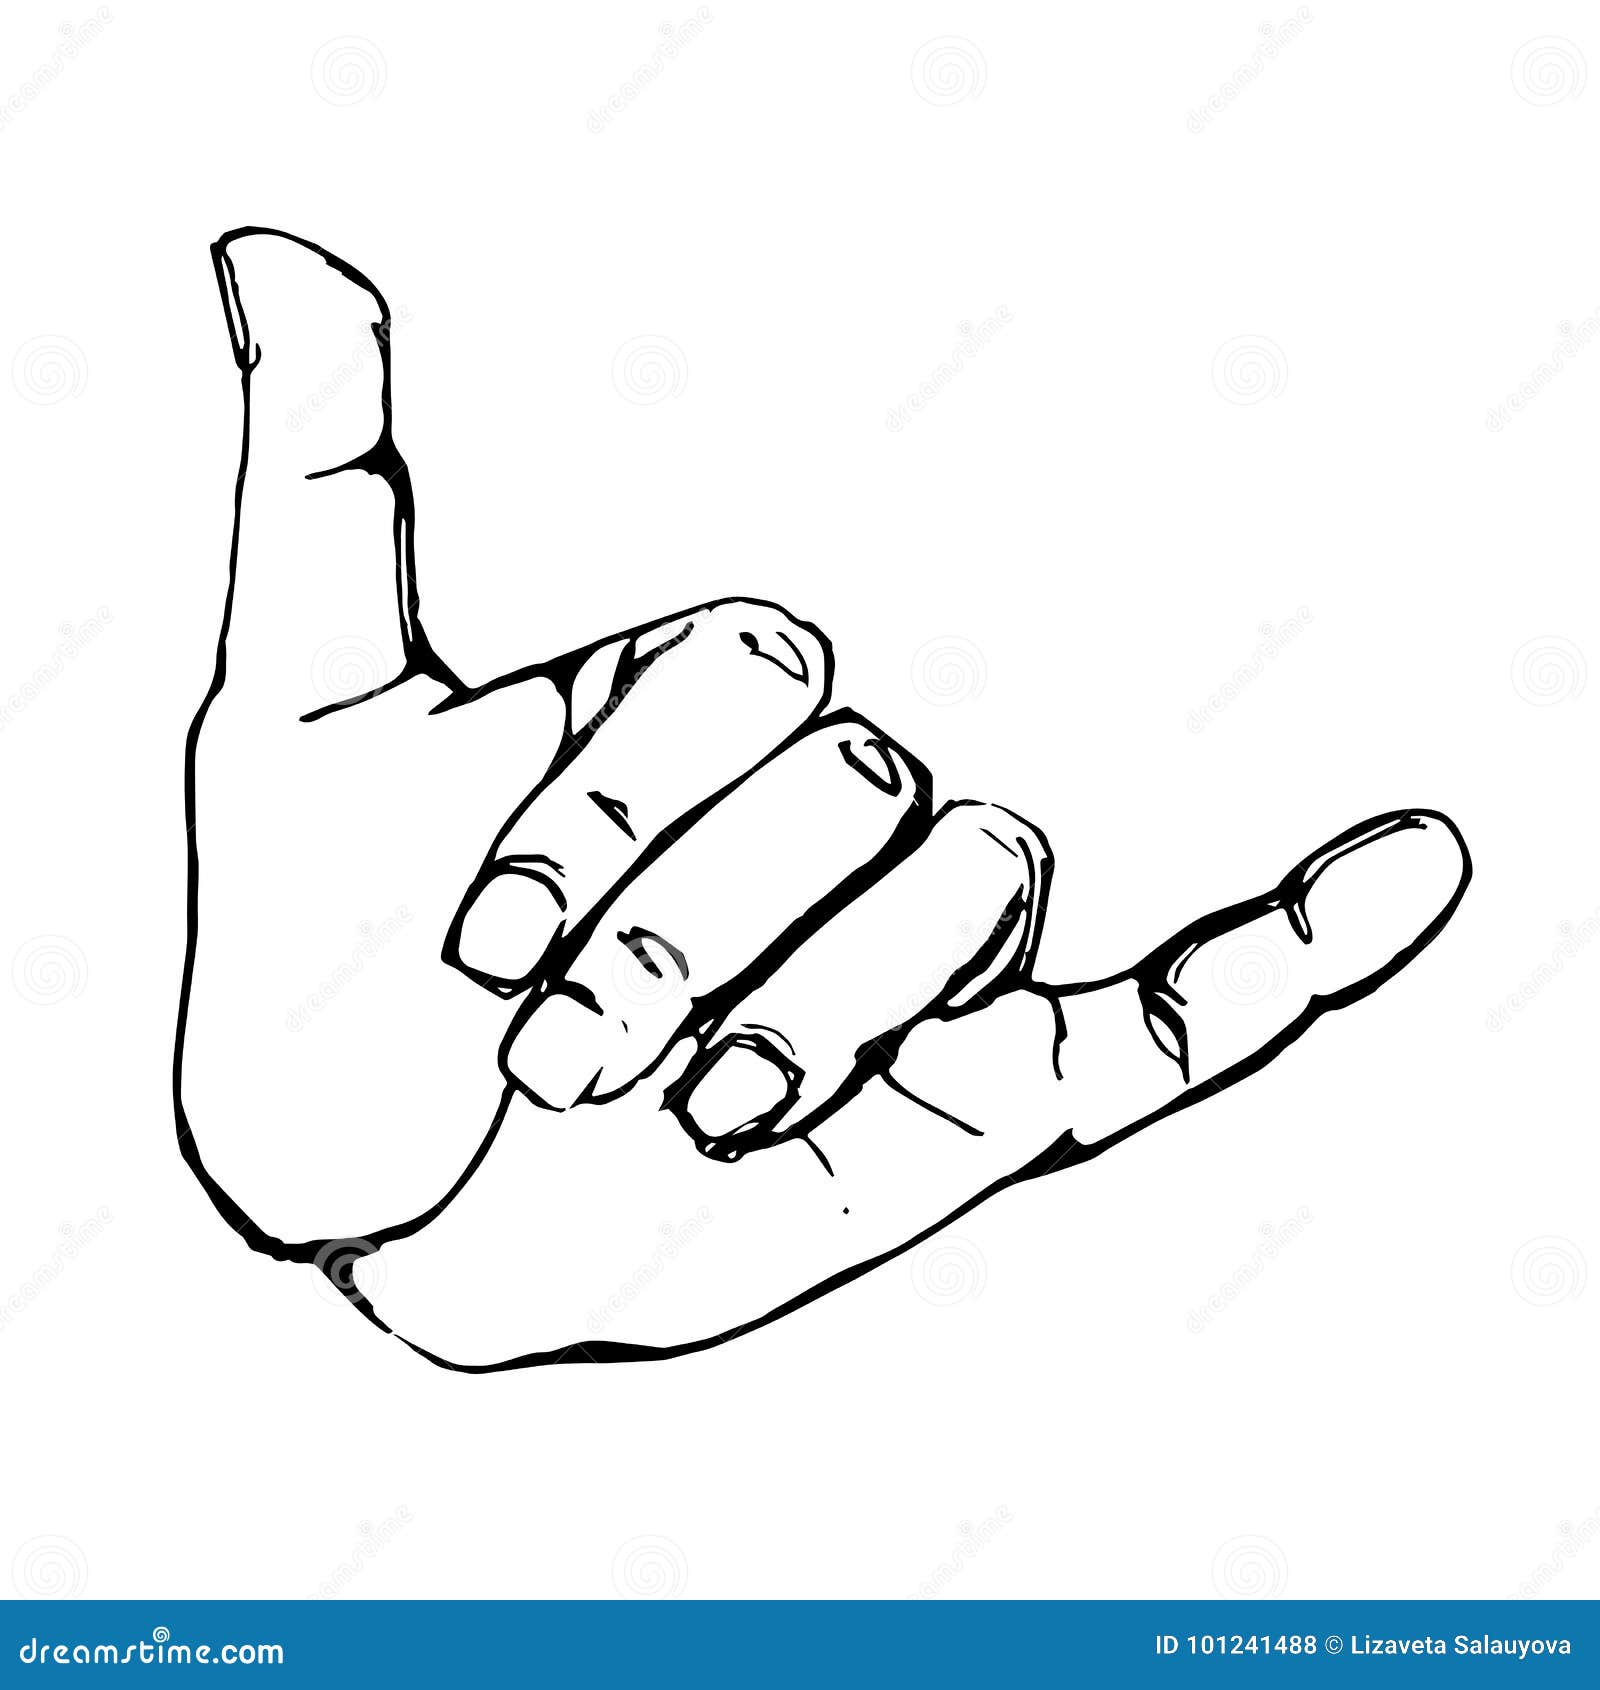 black outline realistic shaka hand gesture icon graphic